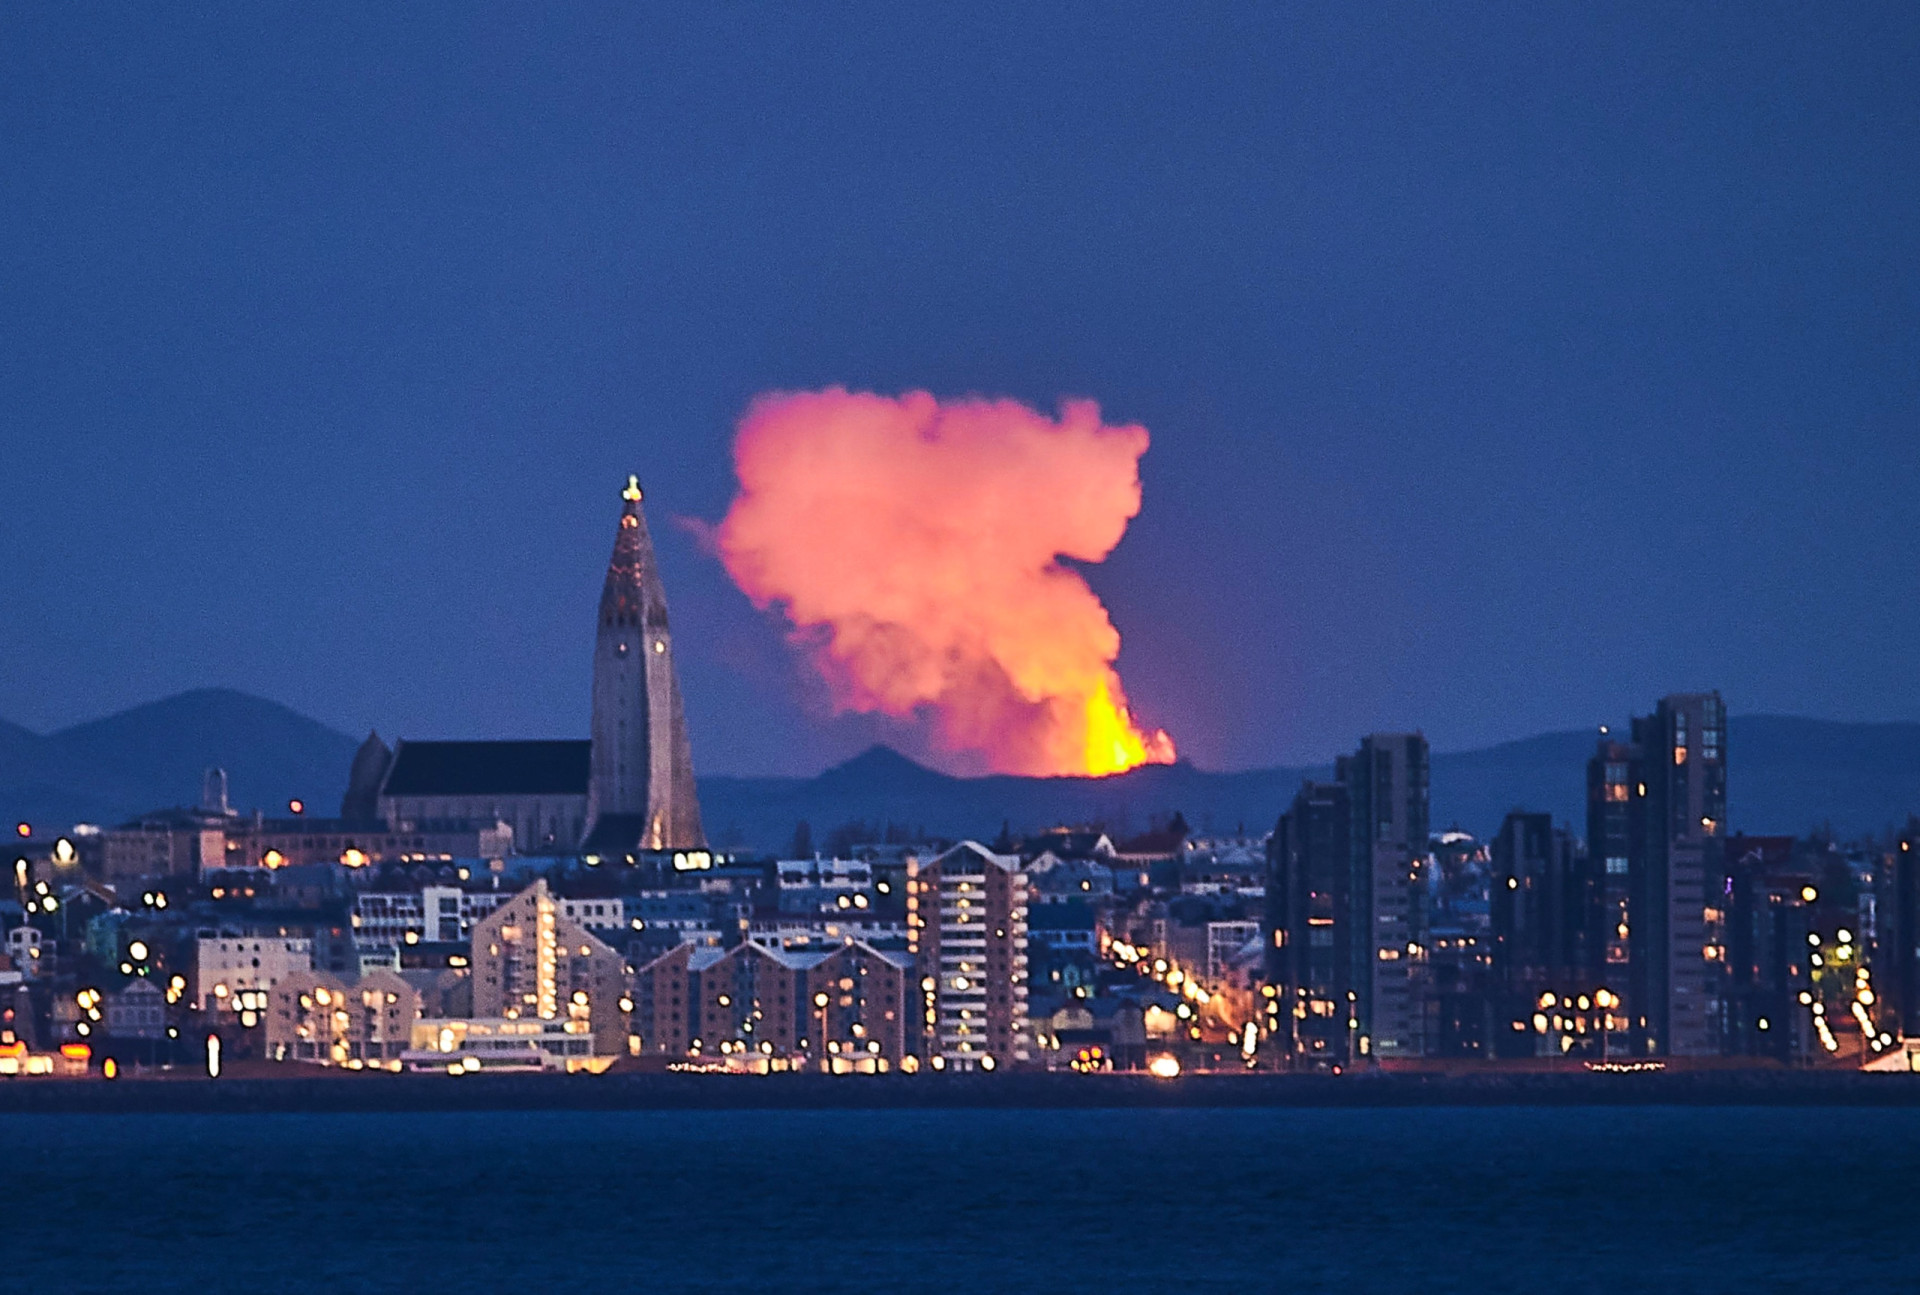 <p>No volcanic eruption had occurred on Iceland's Reykjanes Peninsula for 815 years until March 2021, when Fagradalsfjall awoke from its long slumber. Fagradalsfjall's proximity to Reykjavik attracted local people and foreign visitors to its display of smoke and fire.</p><p>You may also like:<a href="https://www.starsinsider.com/n/206674?utm_source=msn.com&utm_medium=display&utm_campaign=referral_description&utm_content=701215en-us"> Where are the winners of 'The X Factor' now?</a></p>